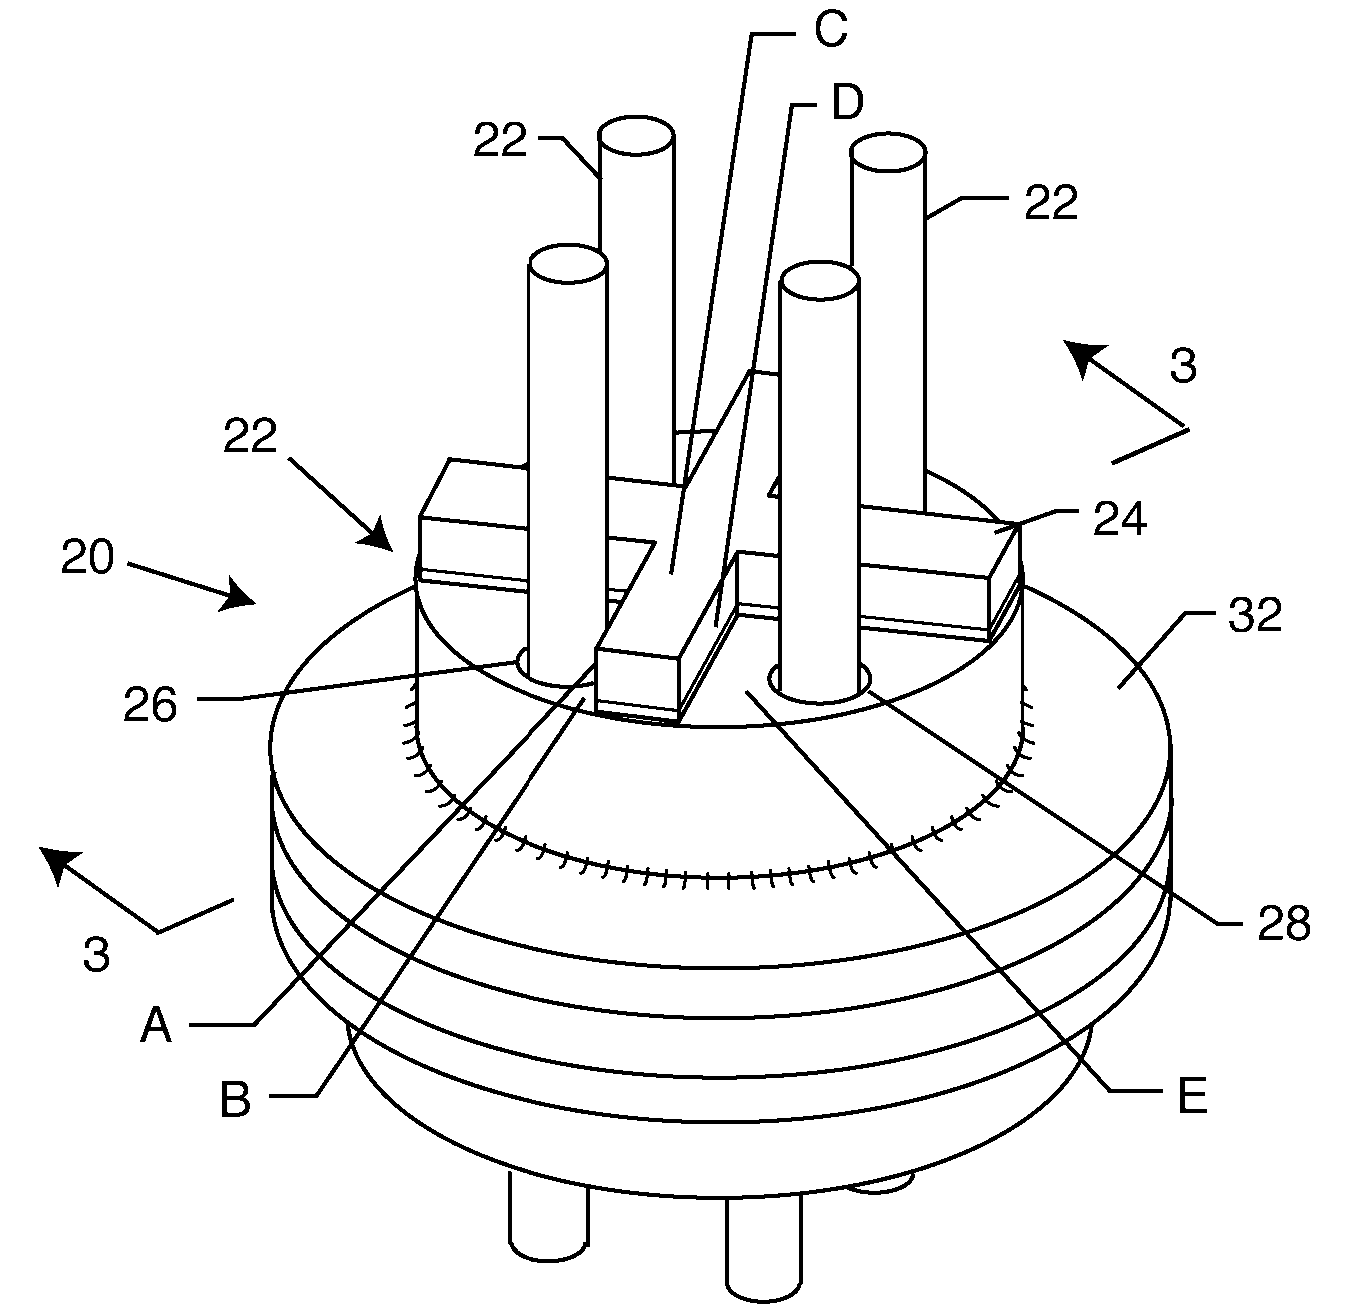 Apparatus to improve the high voltage flashover characteristics of EMI feedthrough filters used in active implantable medical devices